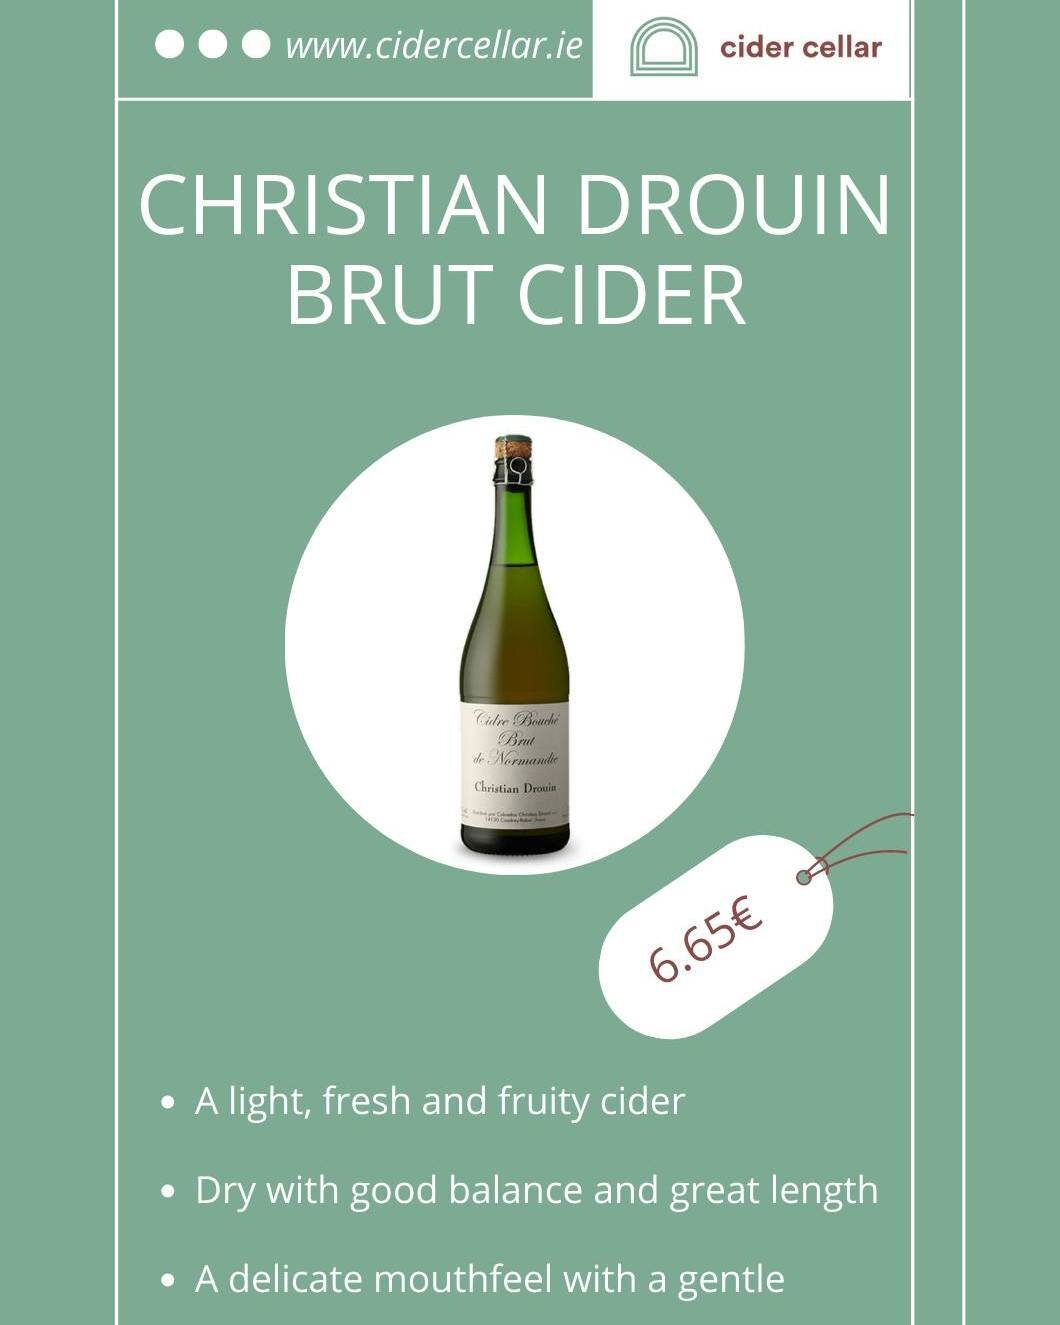 If you fancy a big bottle of cider, why not try Christian Drouin's fabulous 750ml blends